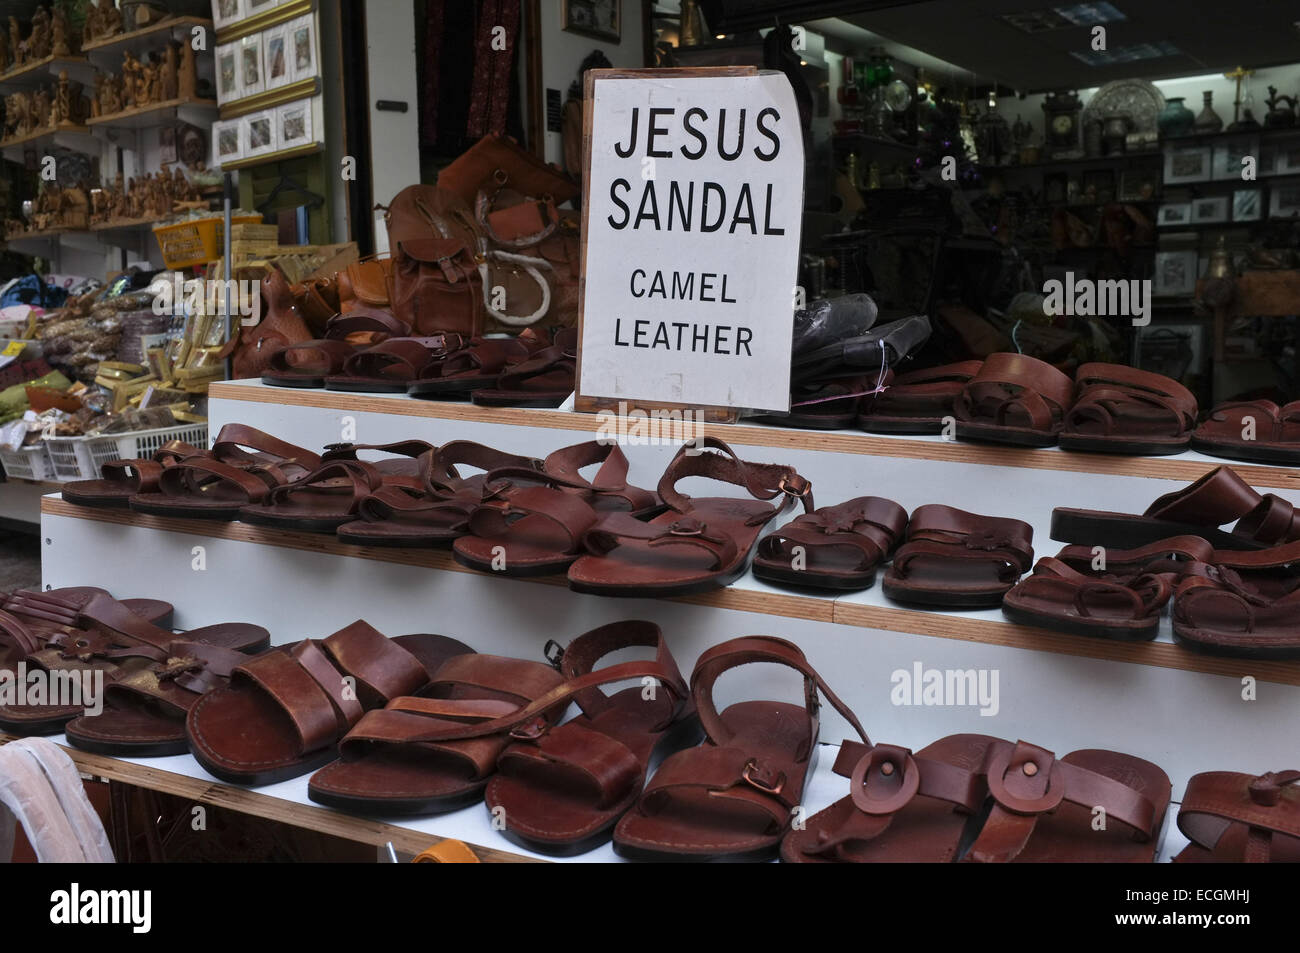 Jesus Sandals High Resolution Stock Photography and Images - Alamy